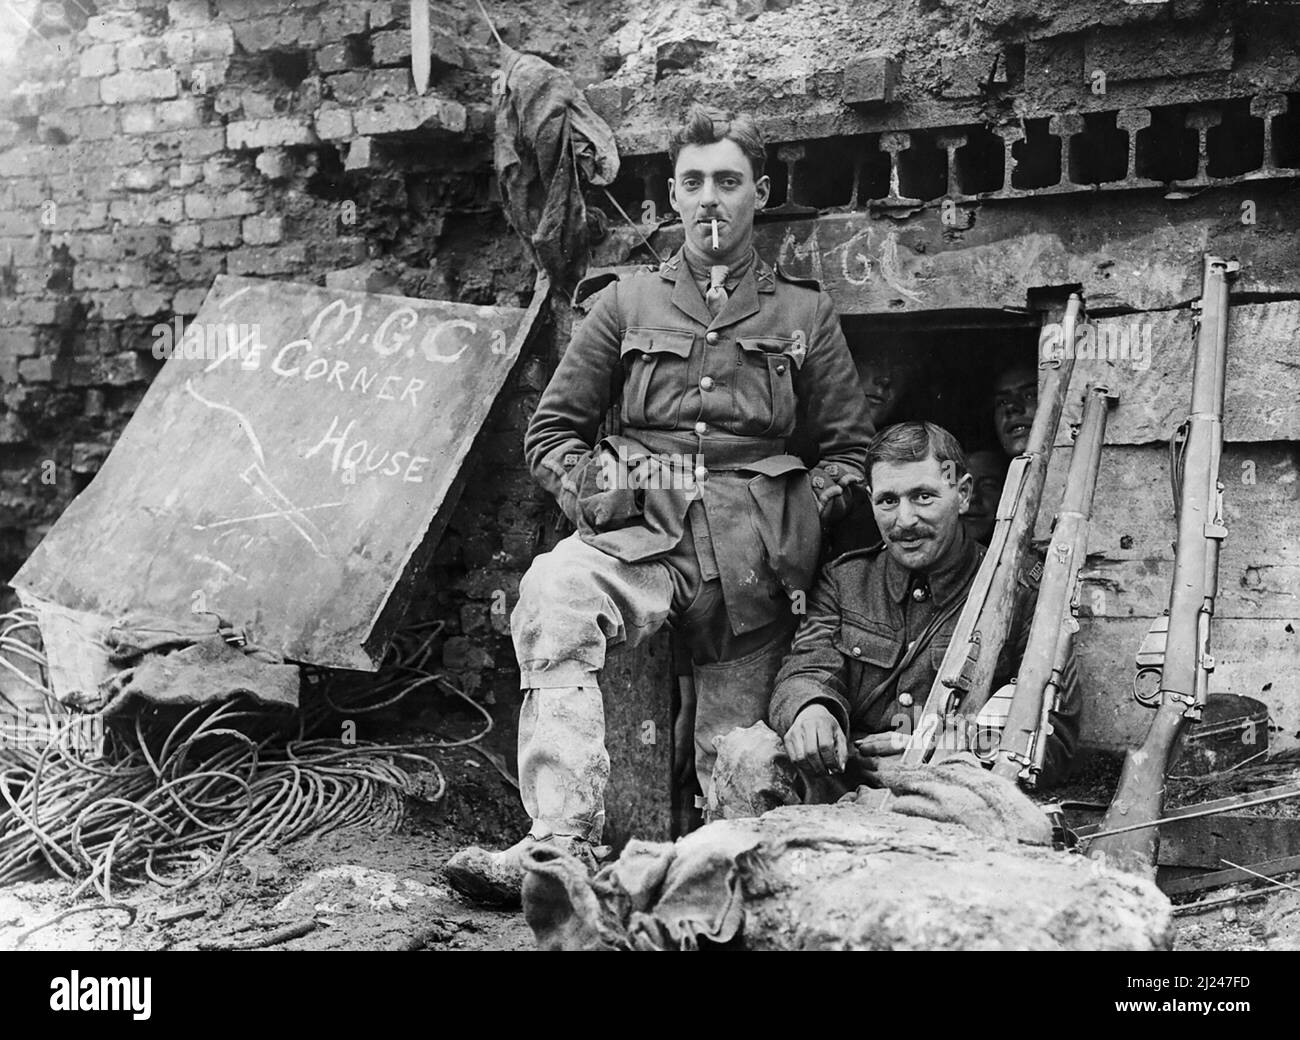 Machine Gun Corps officer, wearing trench waders, stands at the entrance of a captured German dug-out under the ruined Church at Beaumont Hamel, November, 1916. Dug-out nicknamed 'M.G.C. Ye Corner House'. Stock Photo